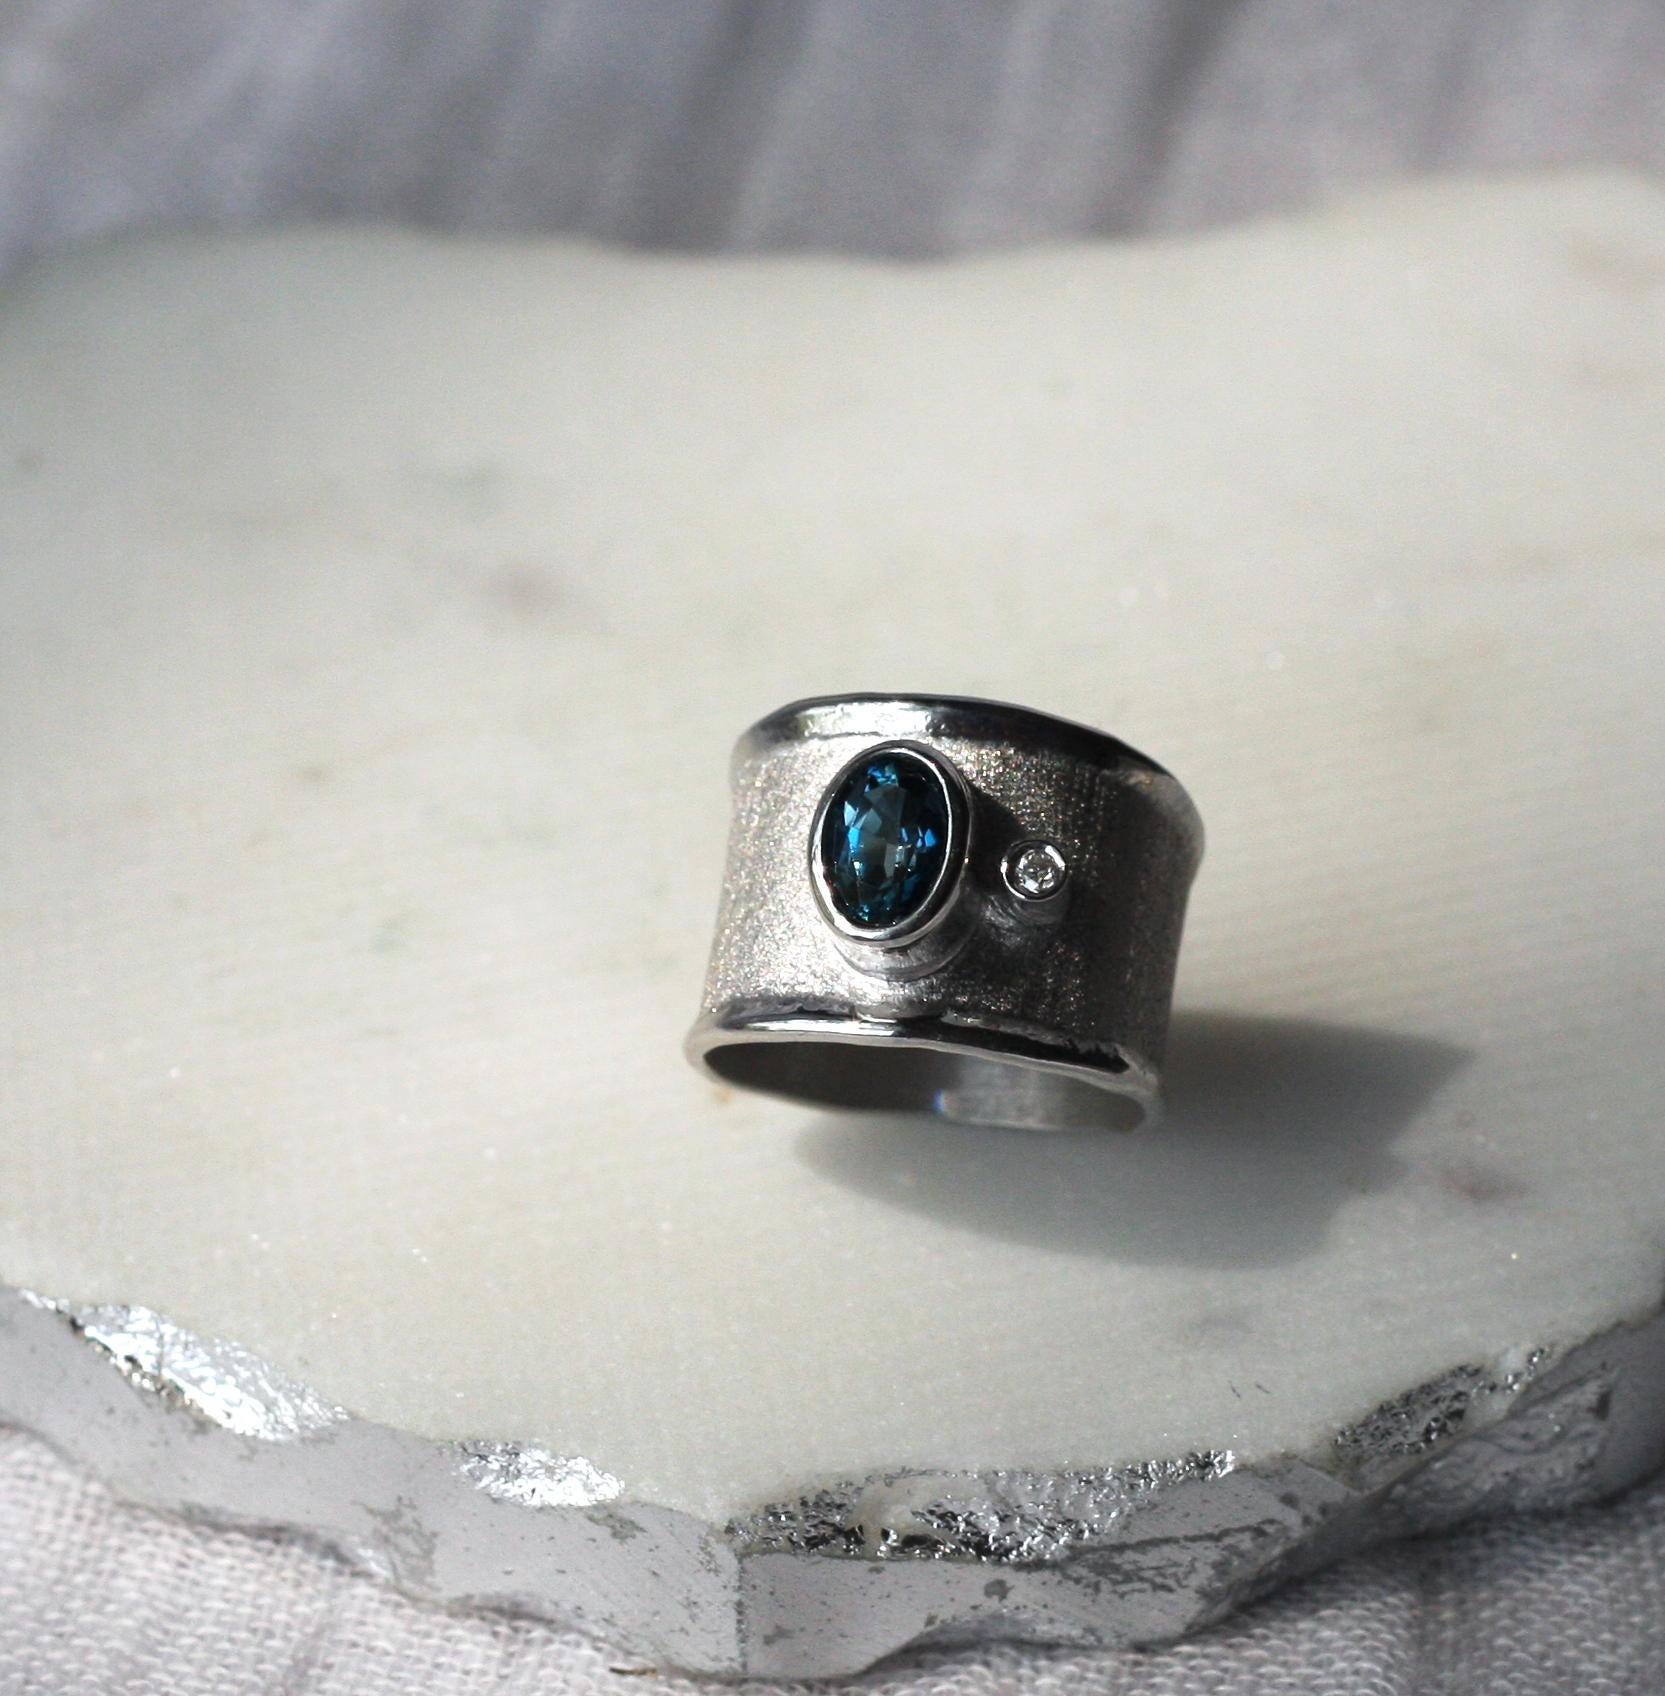 This is Yianni Creations ring from Ammos Collection 100% handmade from fine silver and plated with palladium to resist tarnish. This ring is featuring 1.60 Carat Oval Cut London Blue Topaz accompanied by 0.03 Carat Brilliant-cut White Diamond and